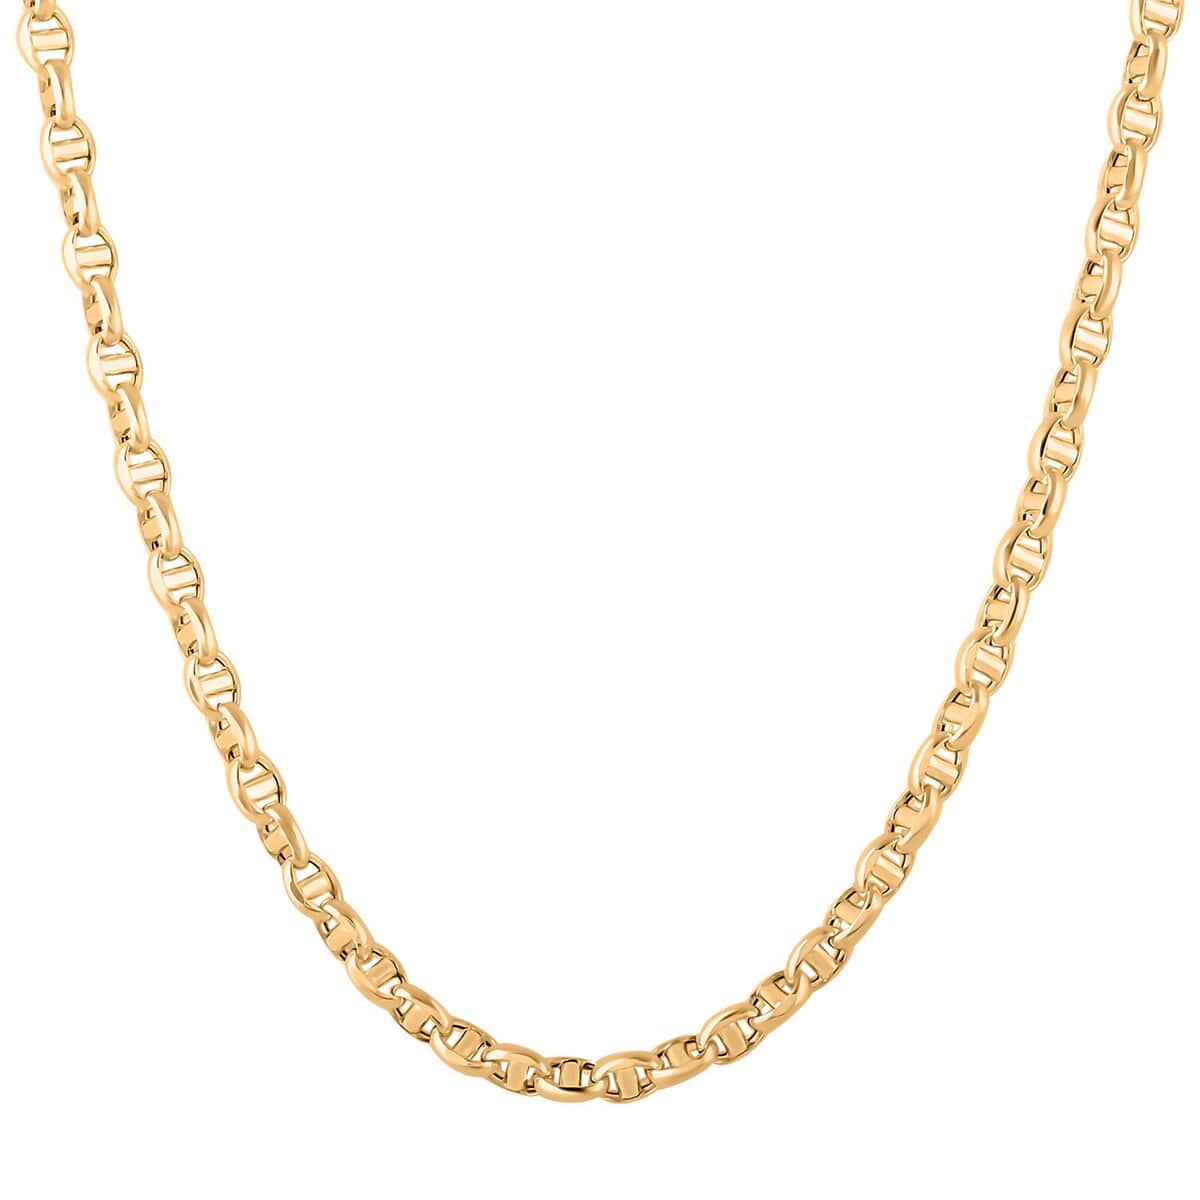 Buy 14K Yellow Gold 4.15mm Filk Chain Necklace 24 Inches 9 Grams at ShopLC.